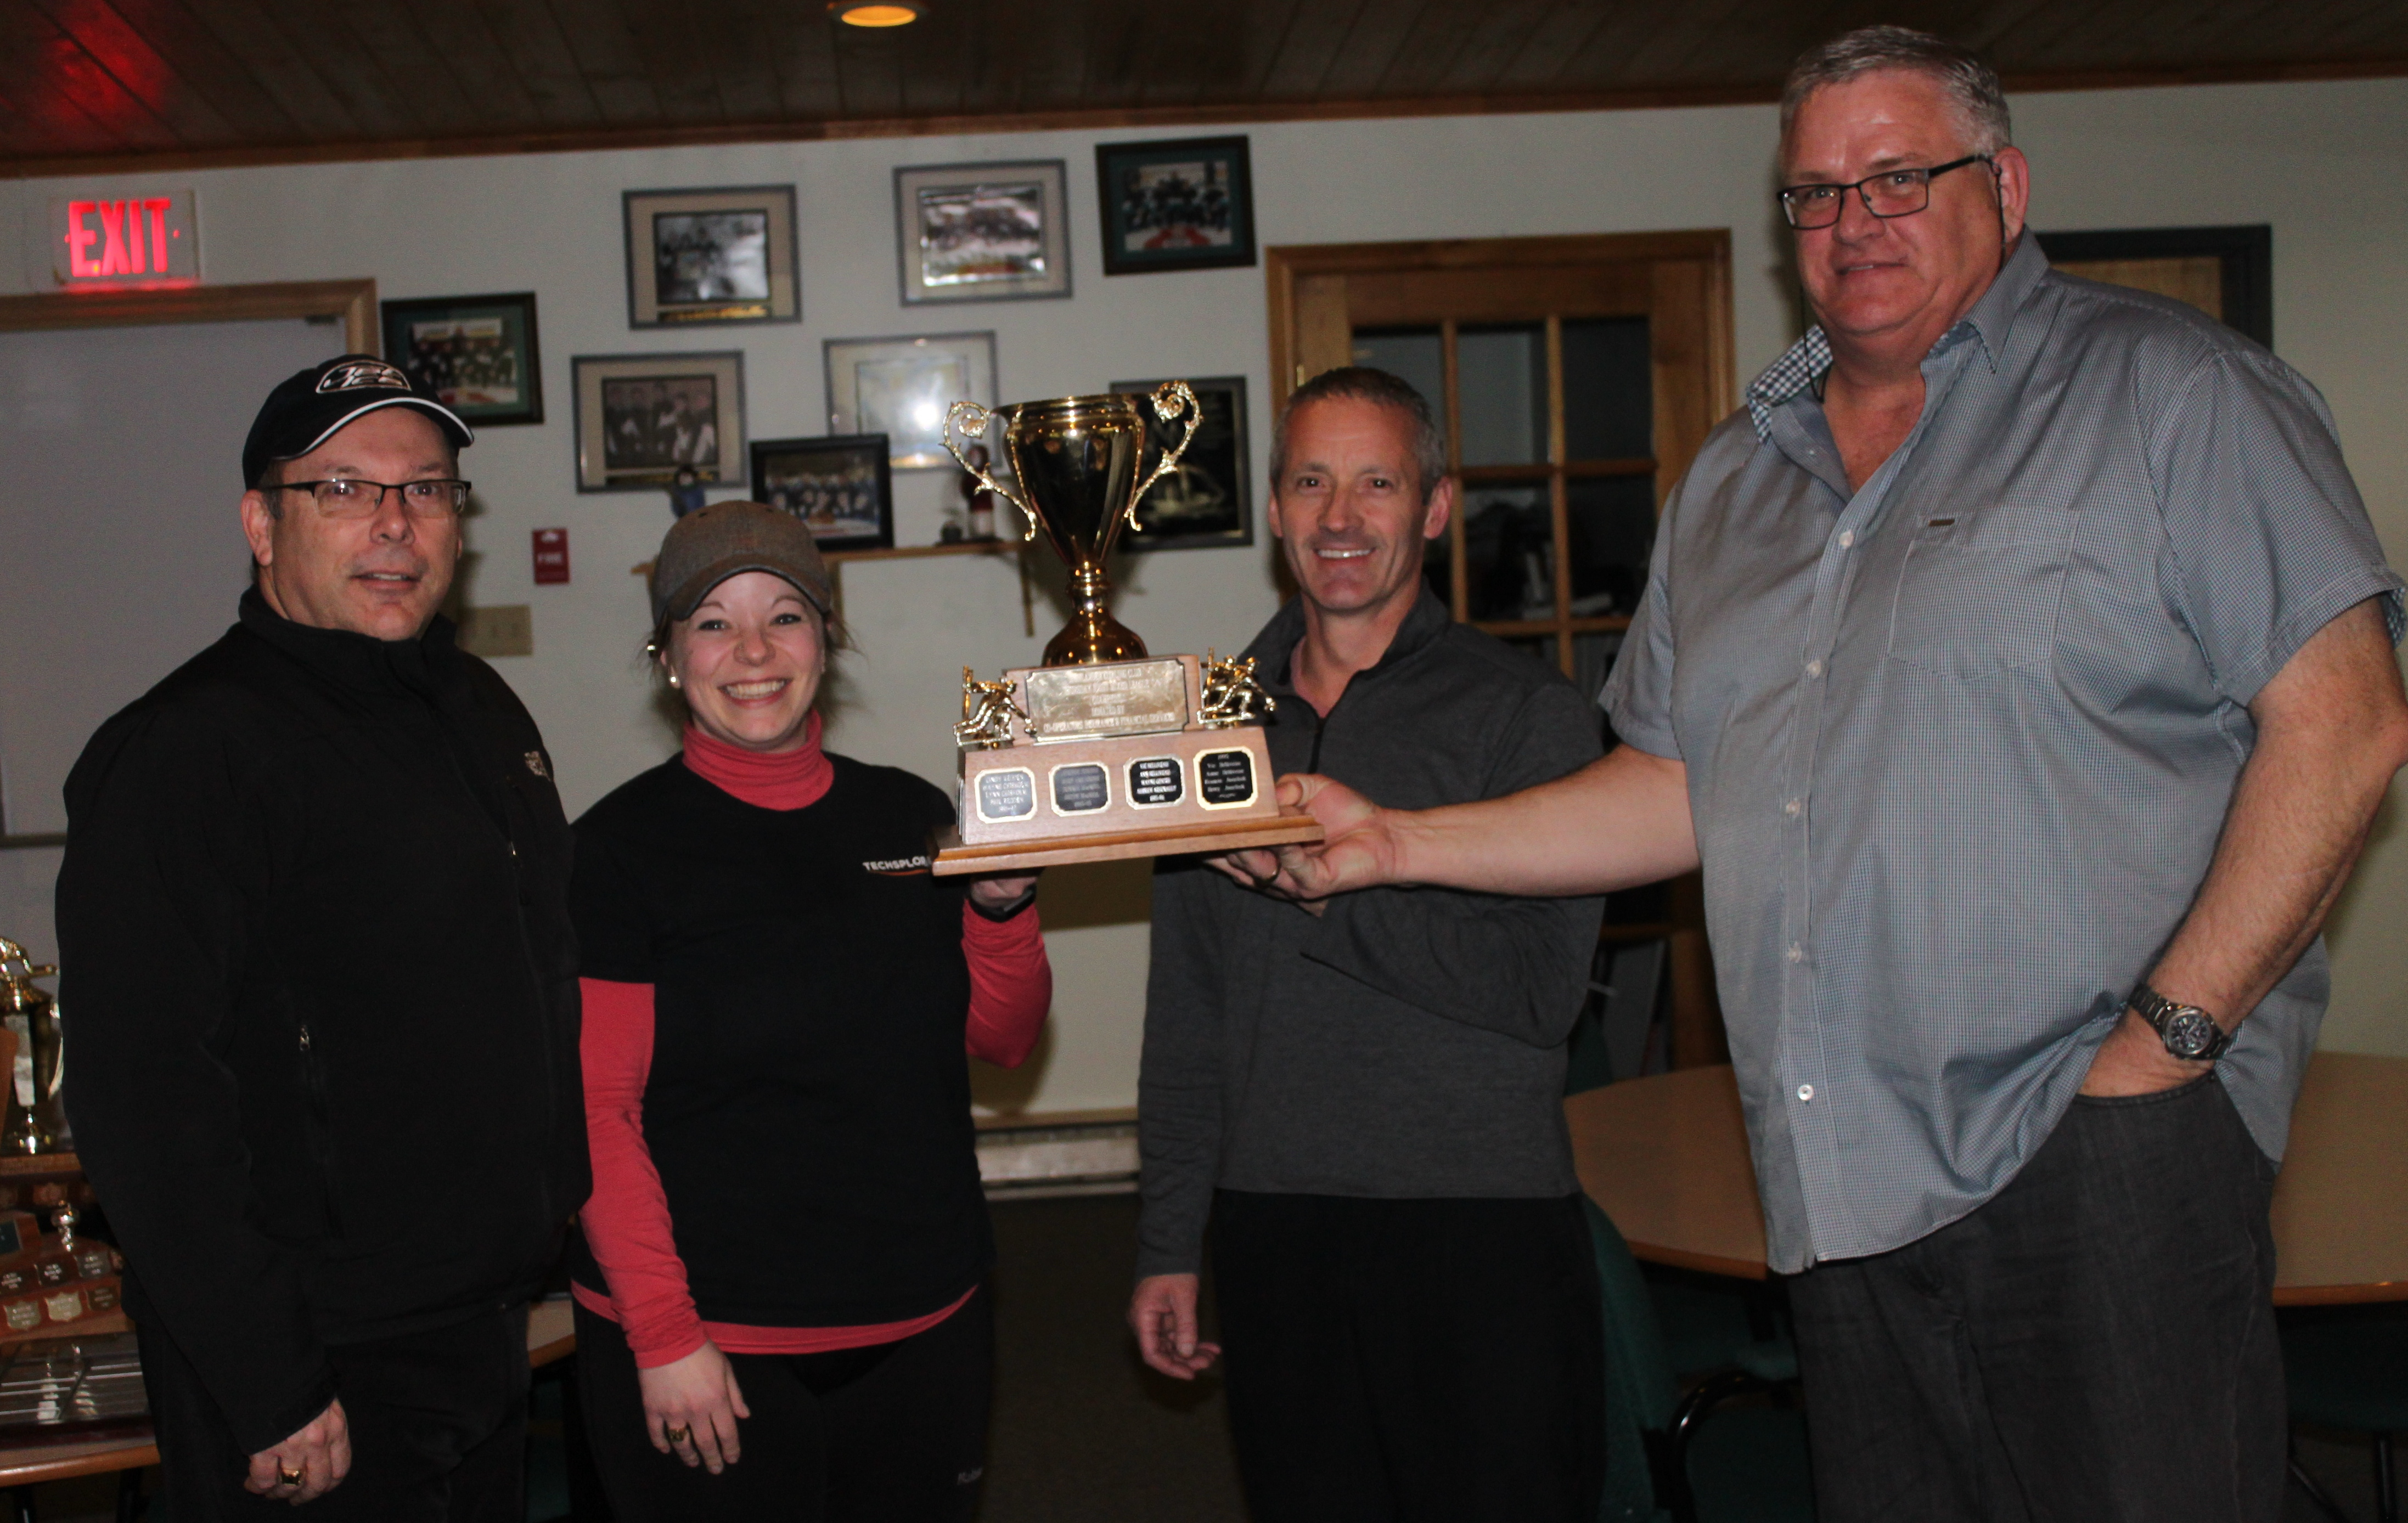 Thursday Night Mixed A-Division Champions
L to R: Jim Marlow, Alicia Mills, Gordie Burns, Frank Cormier